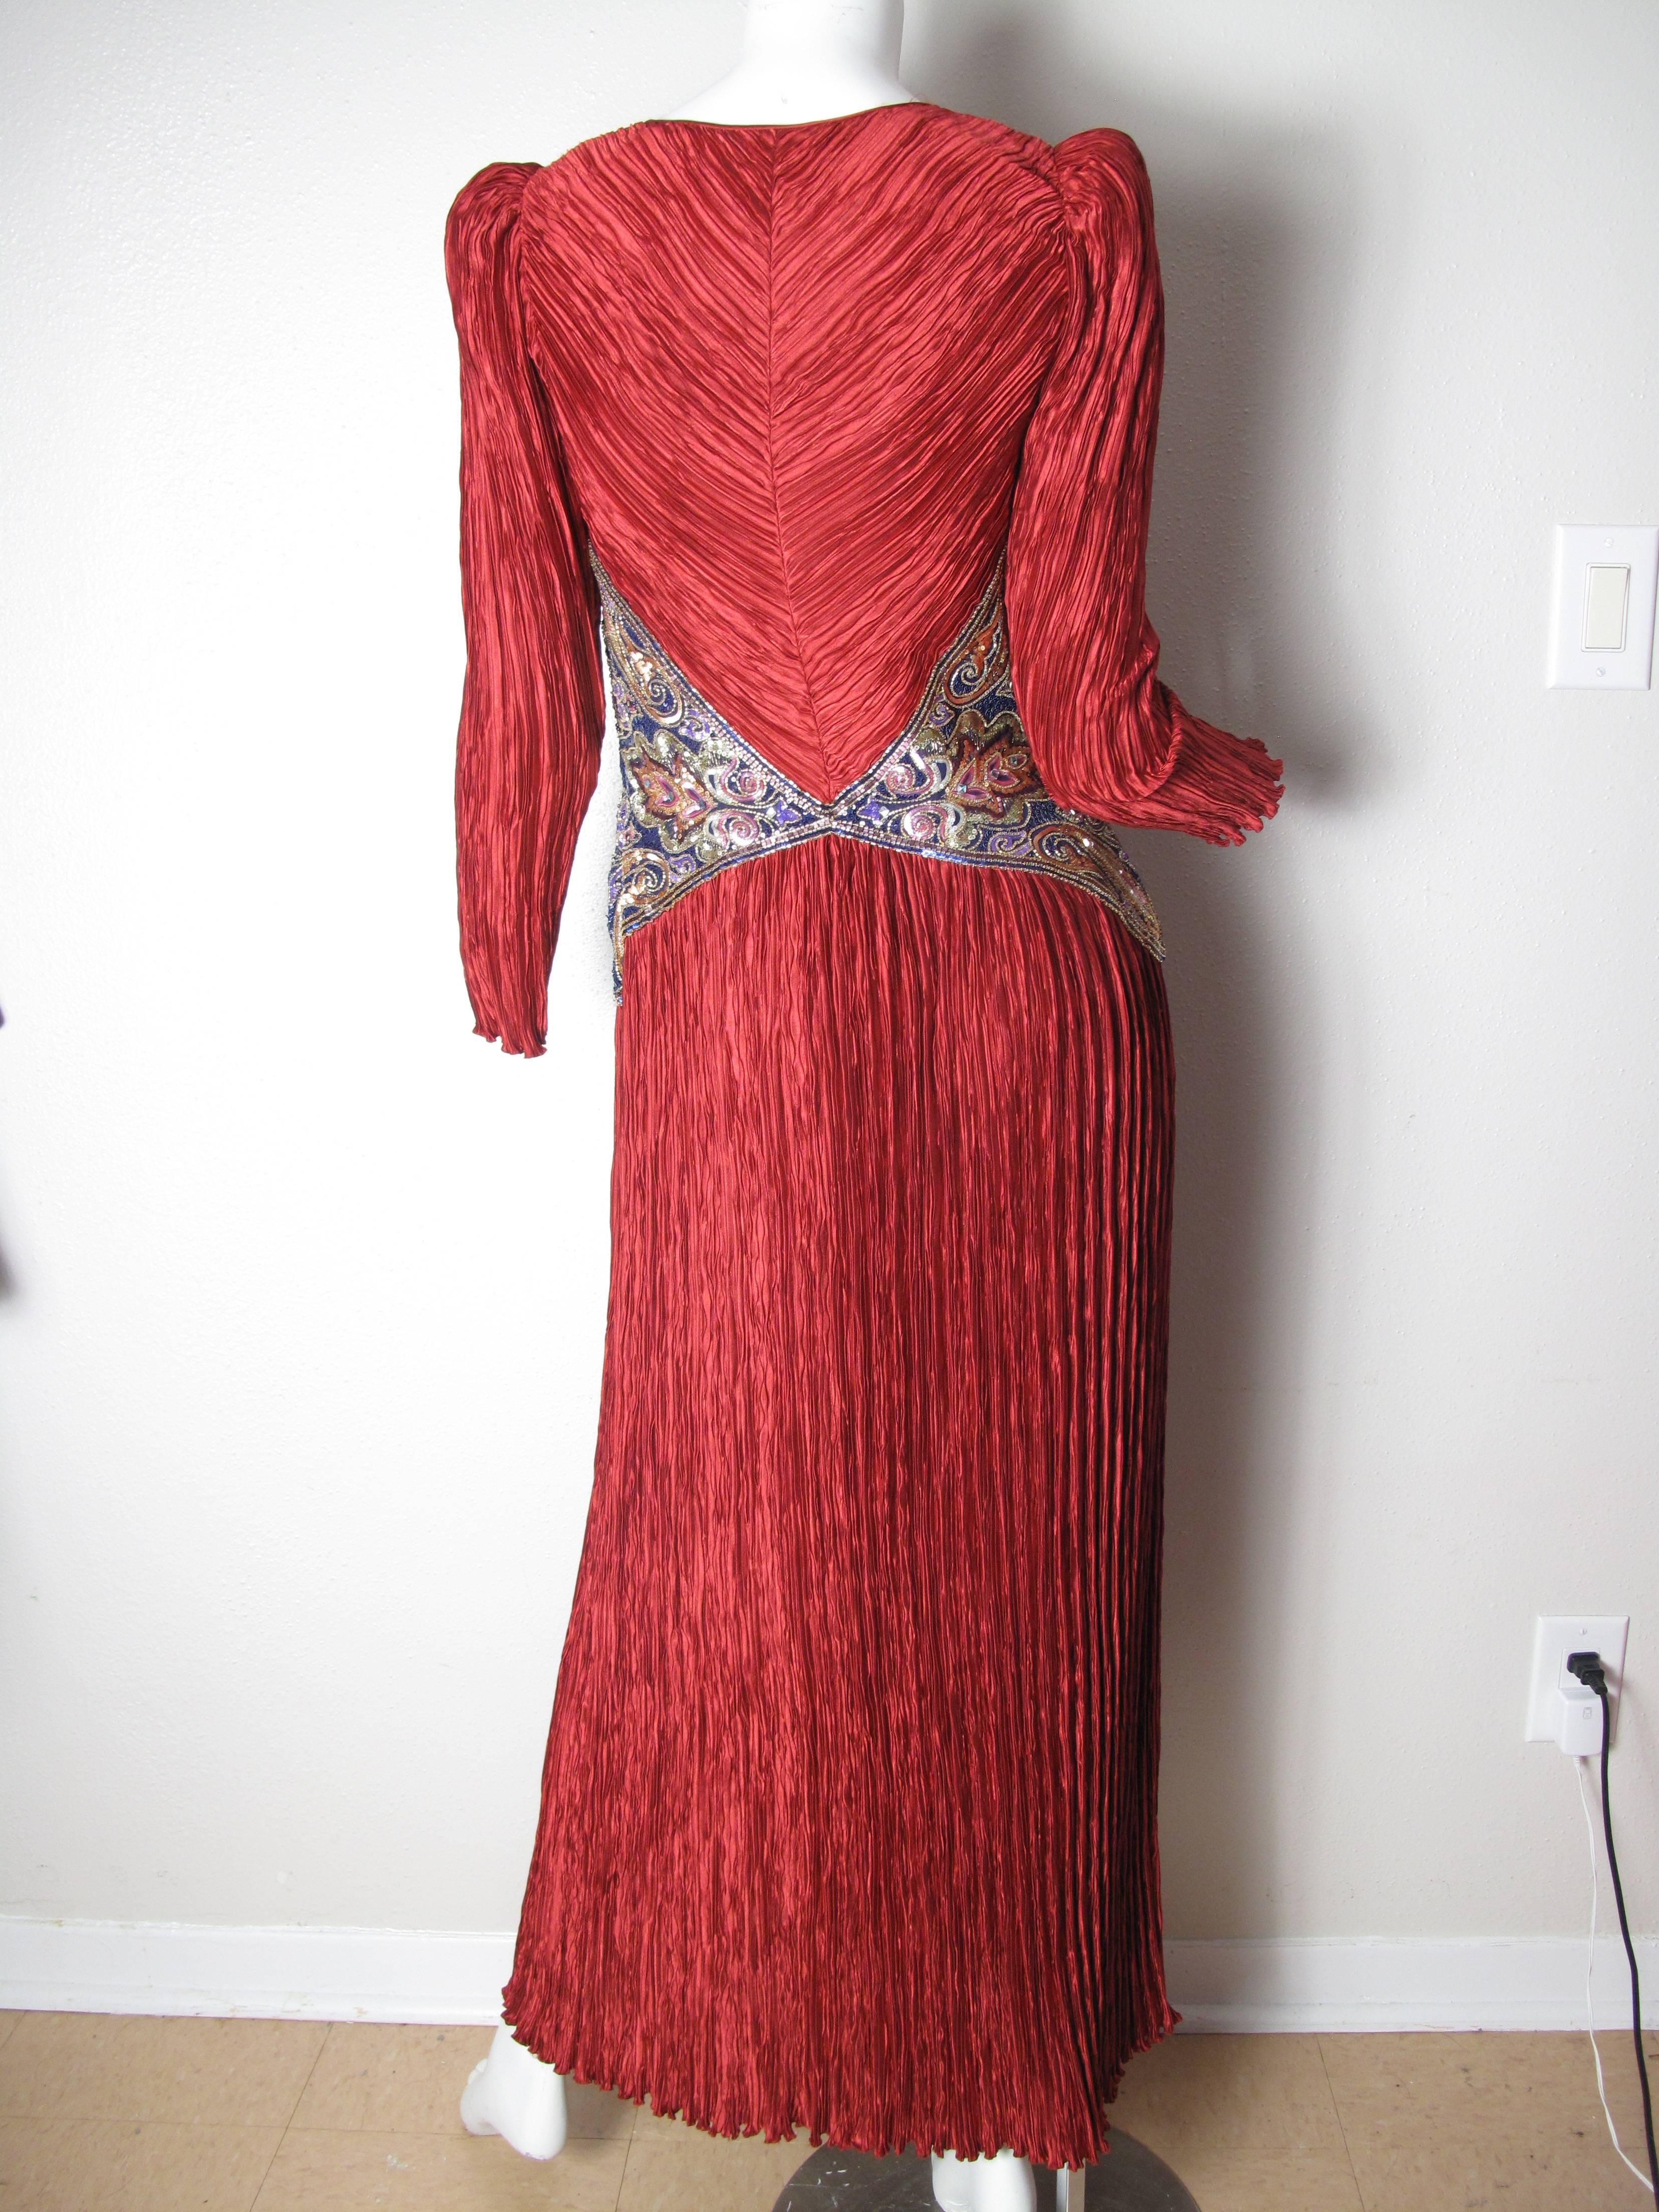 Mary McFadden red pleated gown with beaded and sequin around waist.  Condition: Excellent. Size 10, fits US 8 -10

We offer free ground shipping within the US.  We accept returns for refund, please see our terms.  Please let us know if you have any